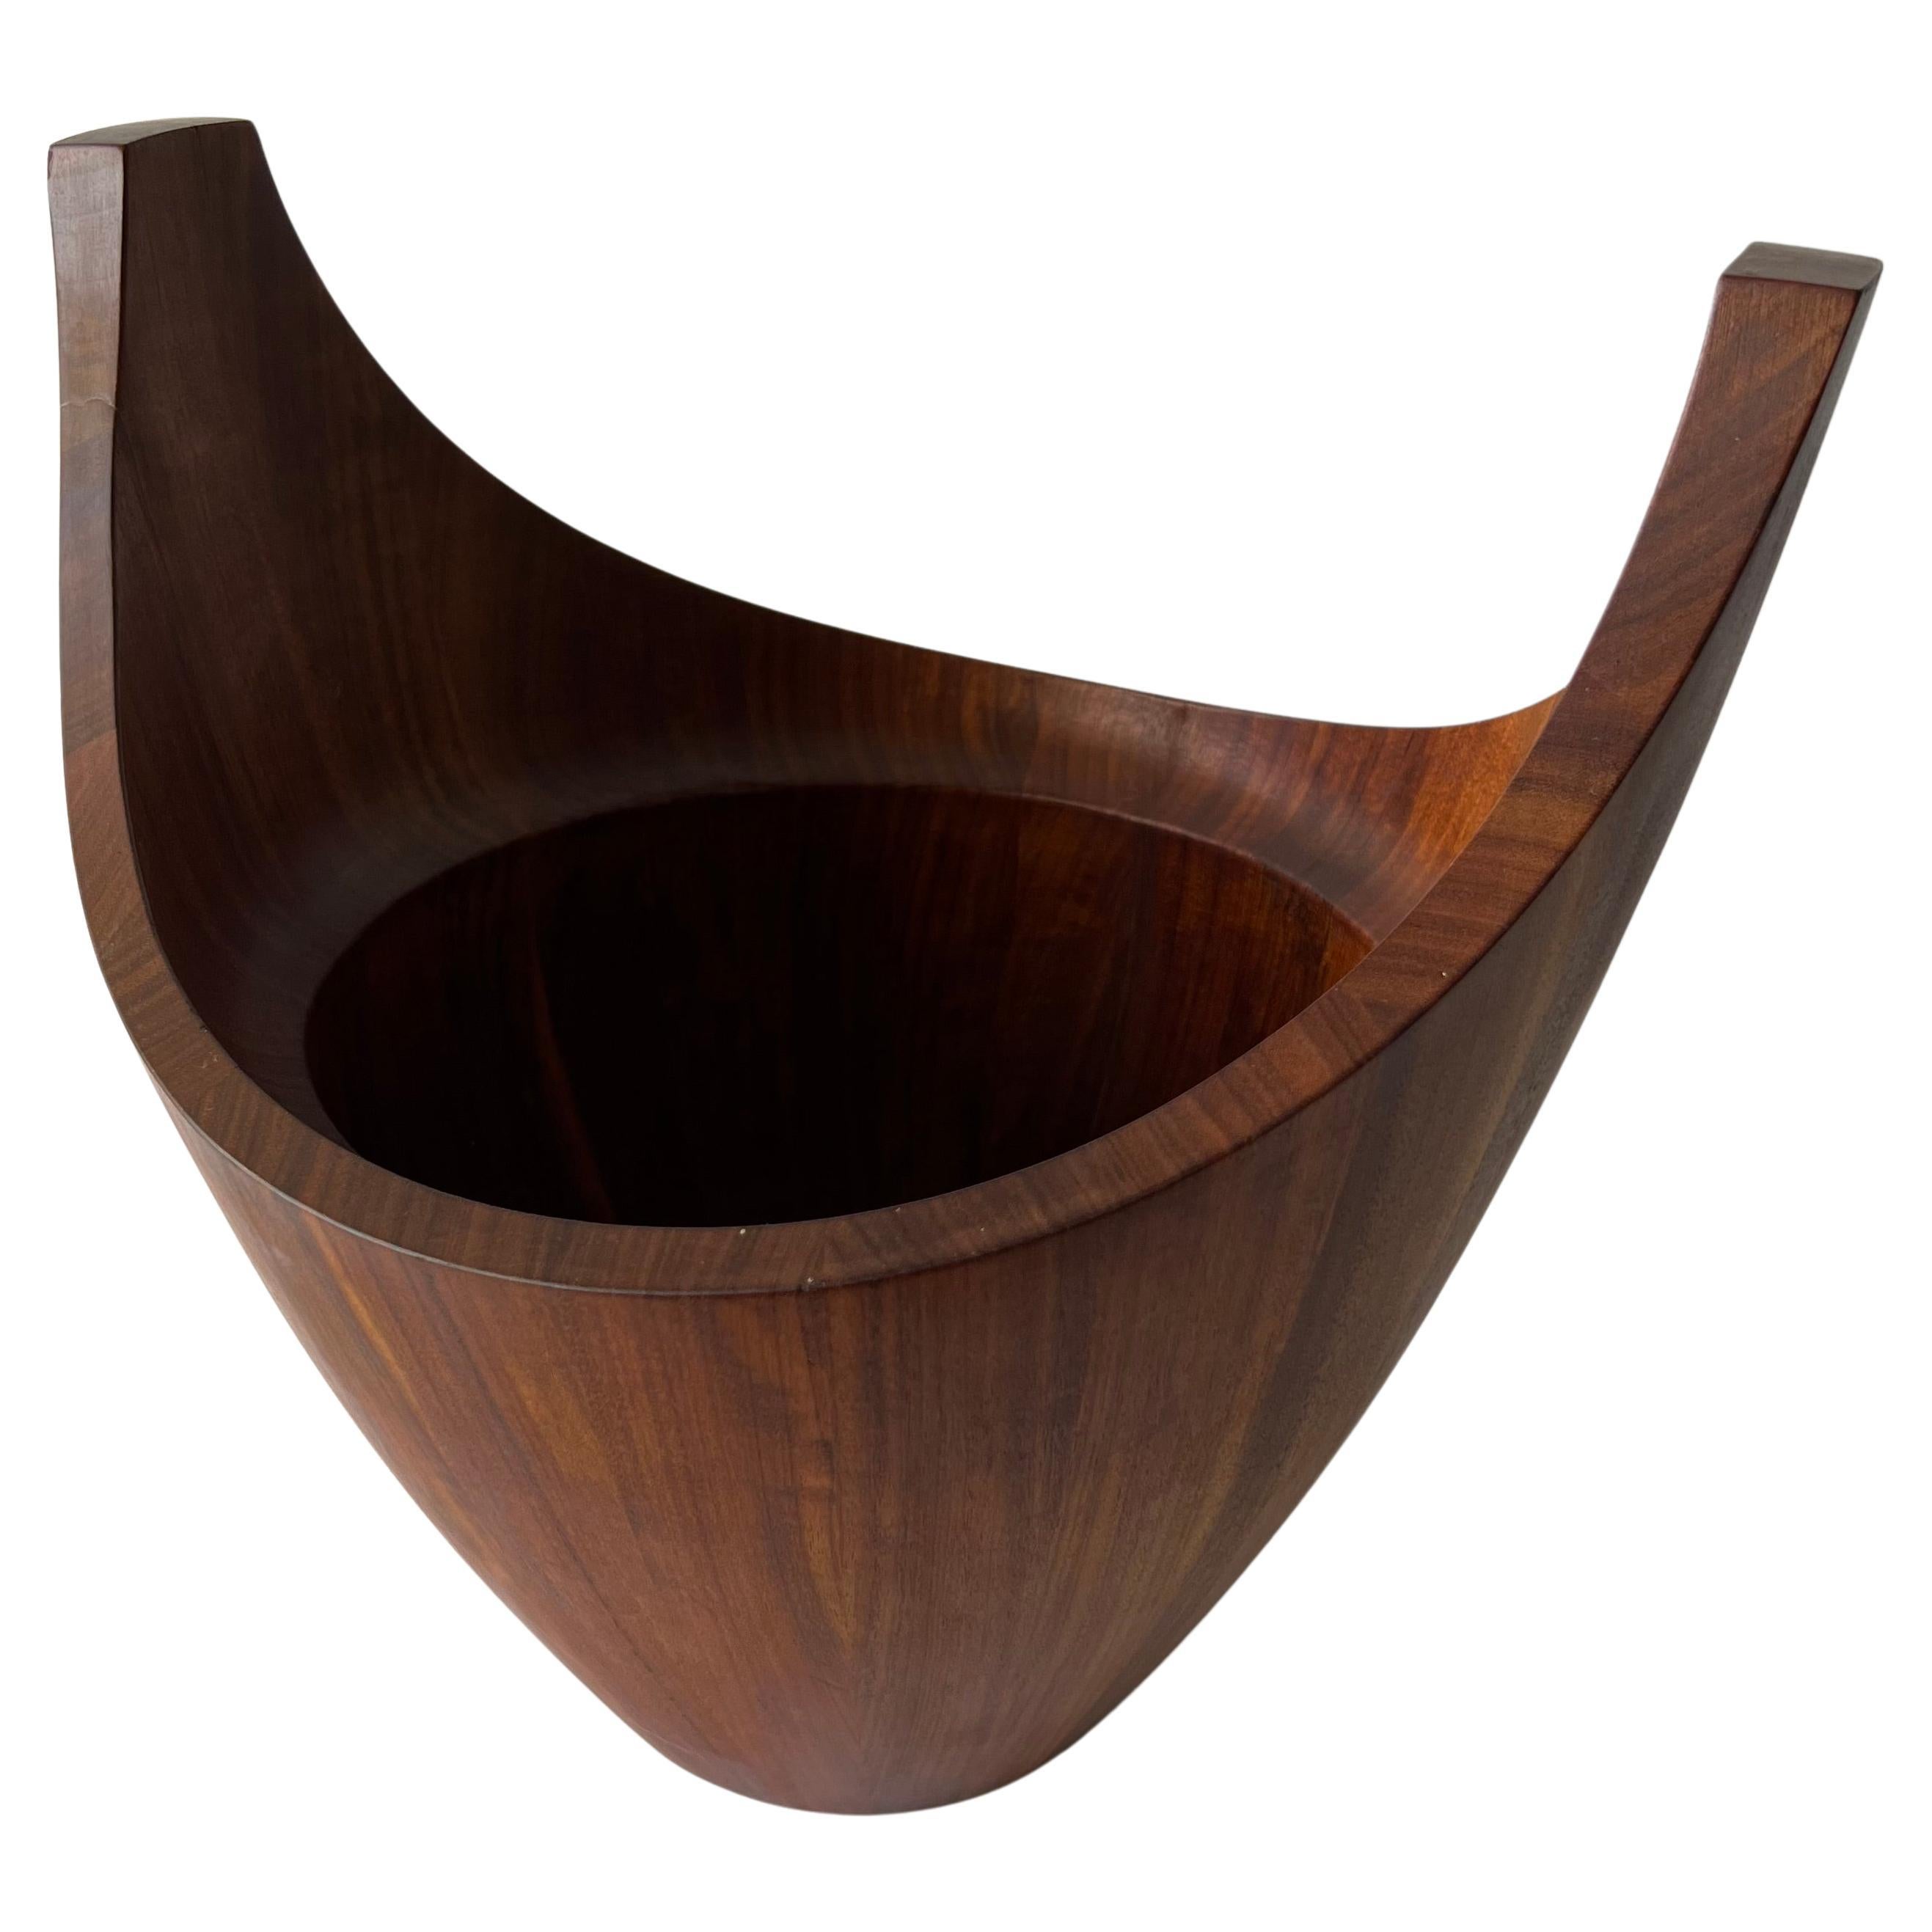 Mutenye Viking salad bowl with beautiful dovetailing, designed by Jens Quistgaard for Dansk.  Bowl measures 14.5